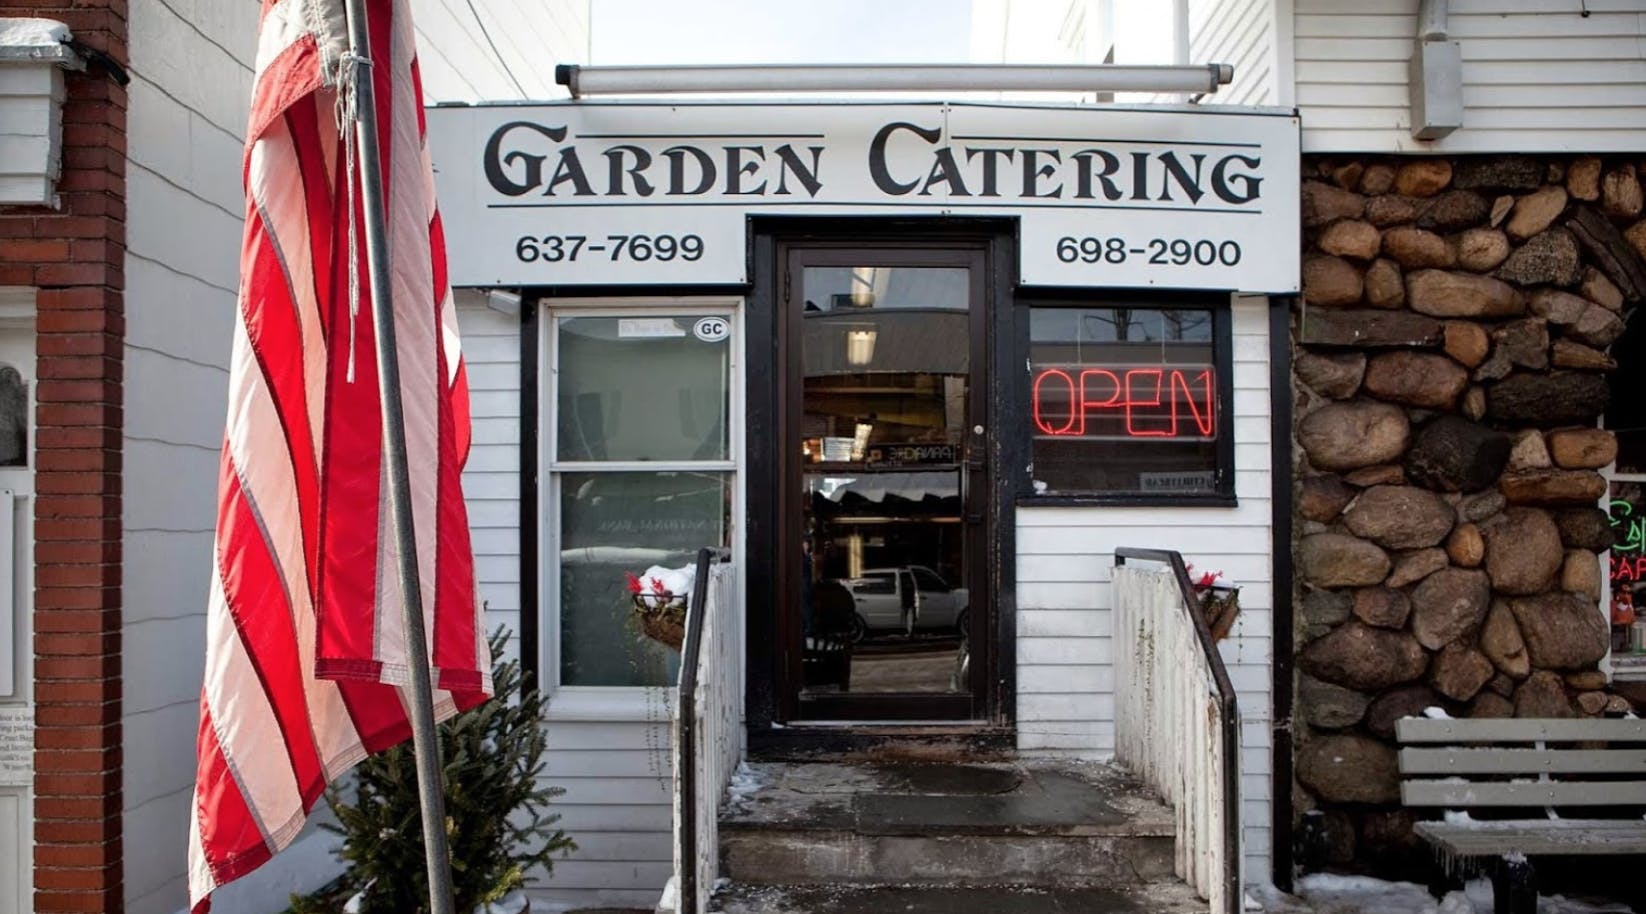 New Haven Hours Location Garden Catering The Best Nuggets You Ll Ever Have Locations In Ct Ny